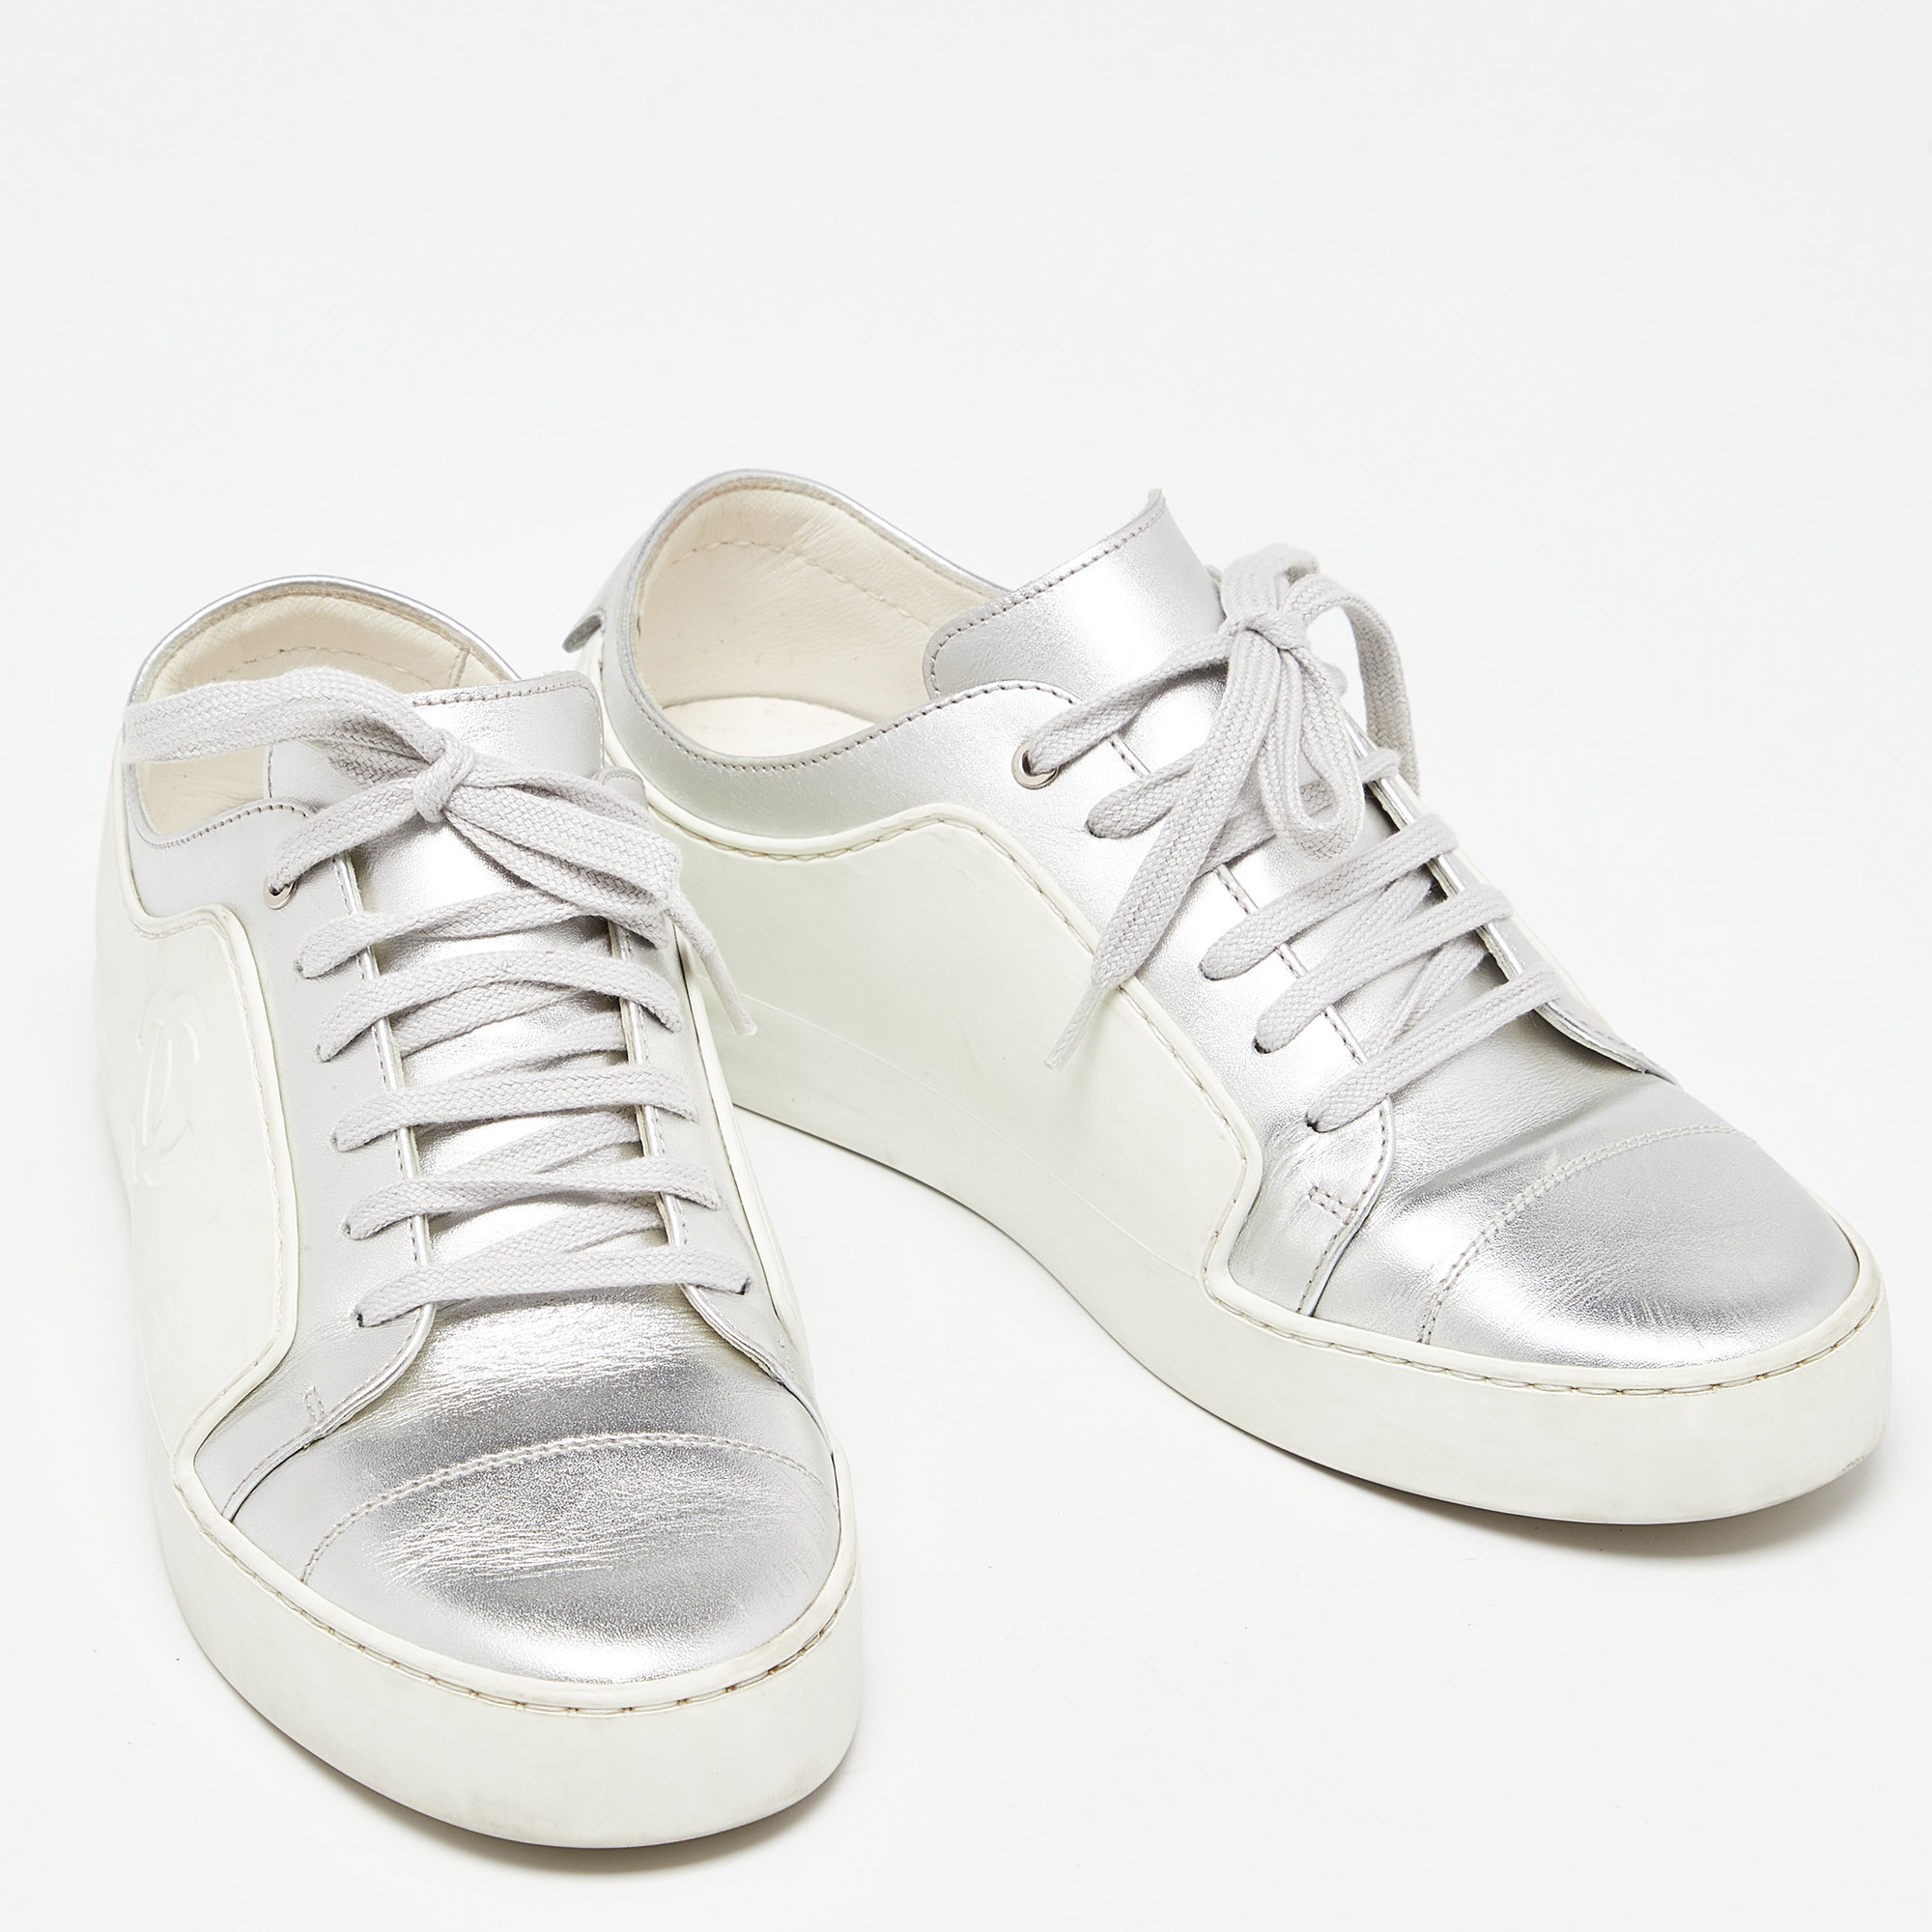 Chanel White/Silver Rubber And Leather CC Low Top Sneakers Size 39